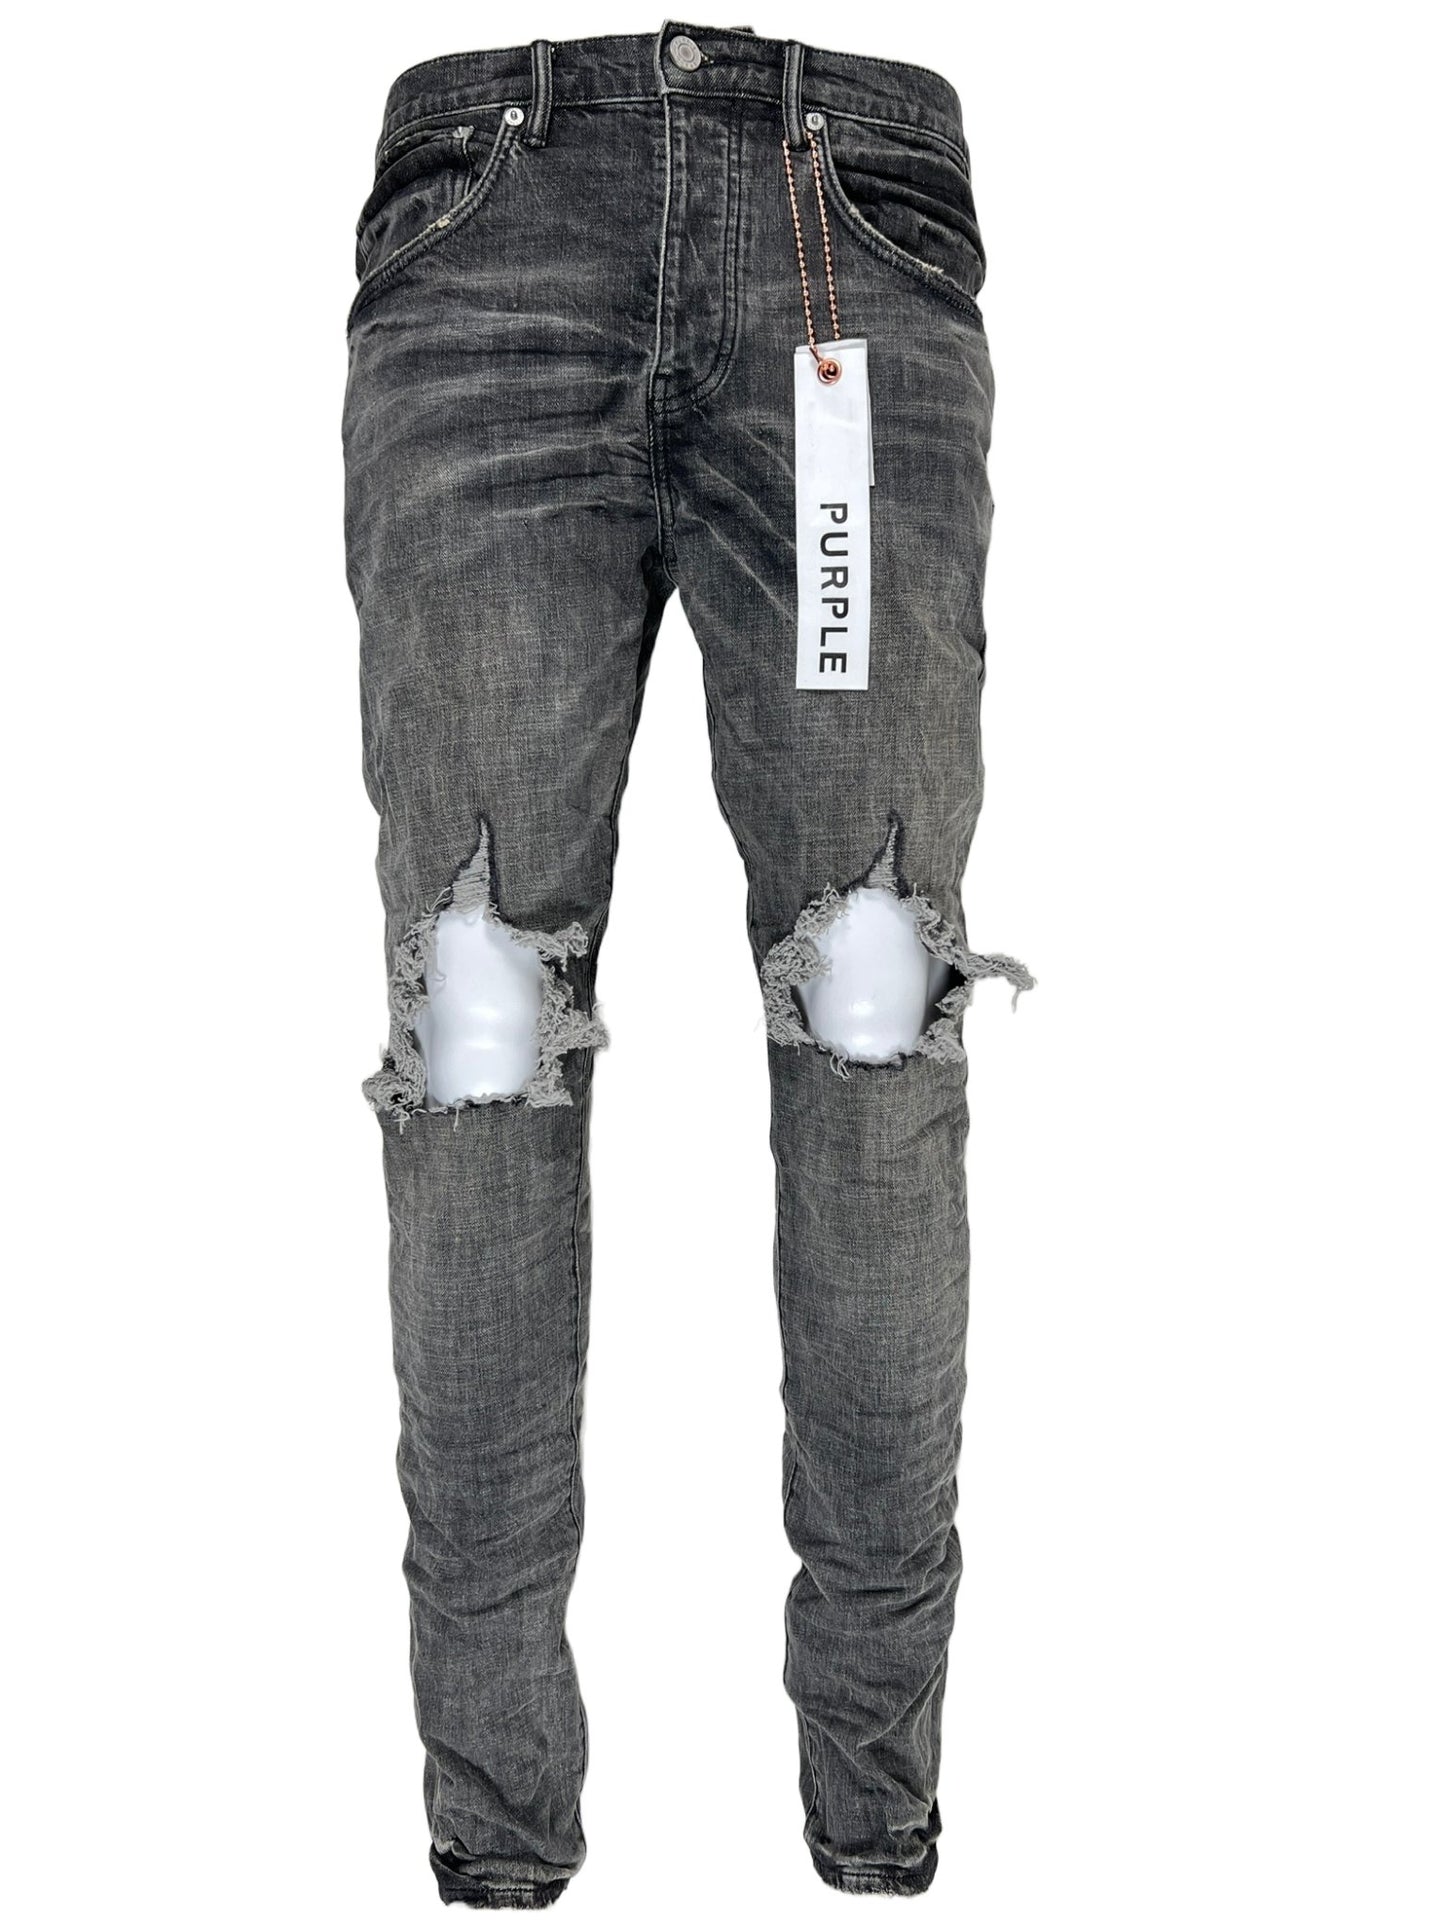 Purple Brand Loose-fit Jeans in Gray for Men